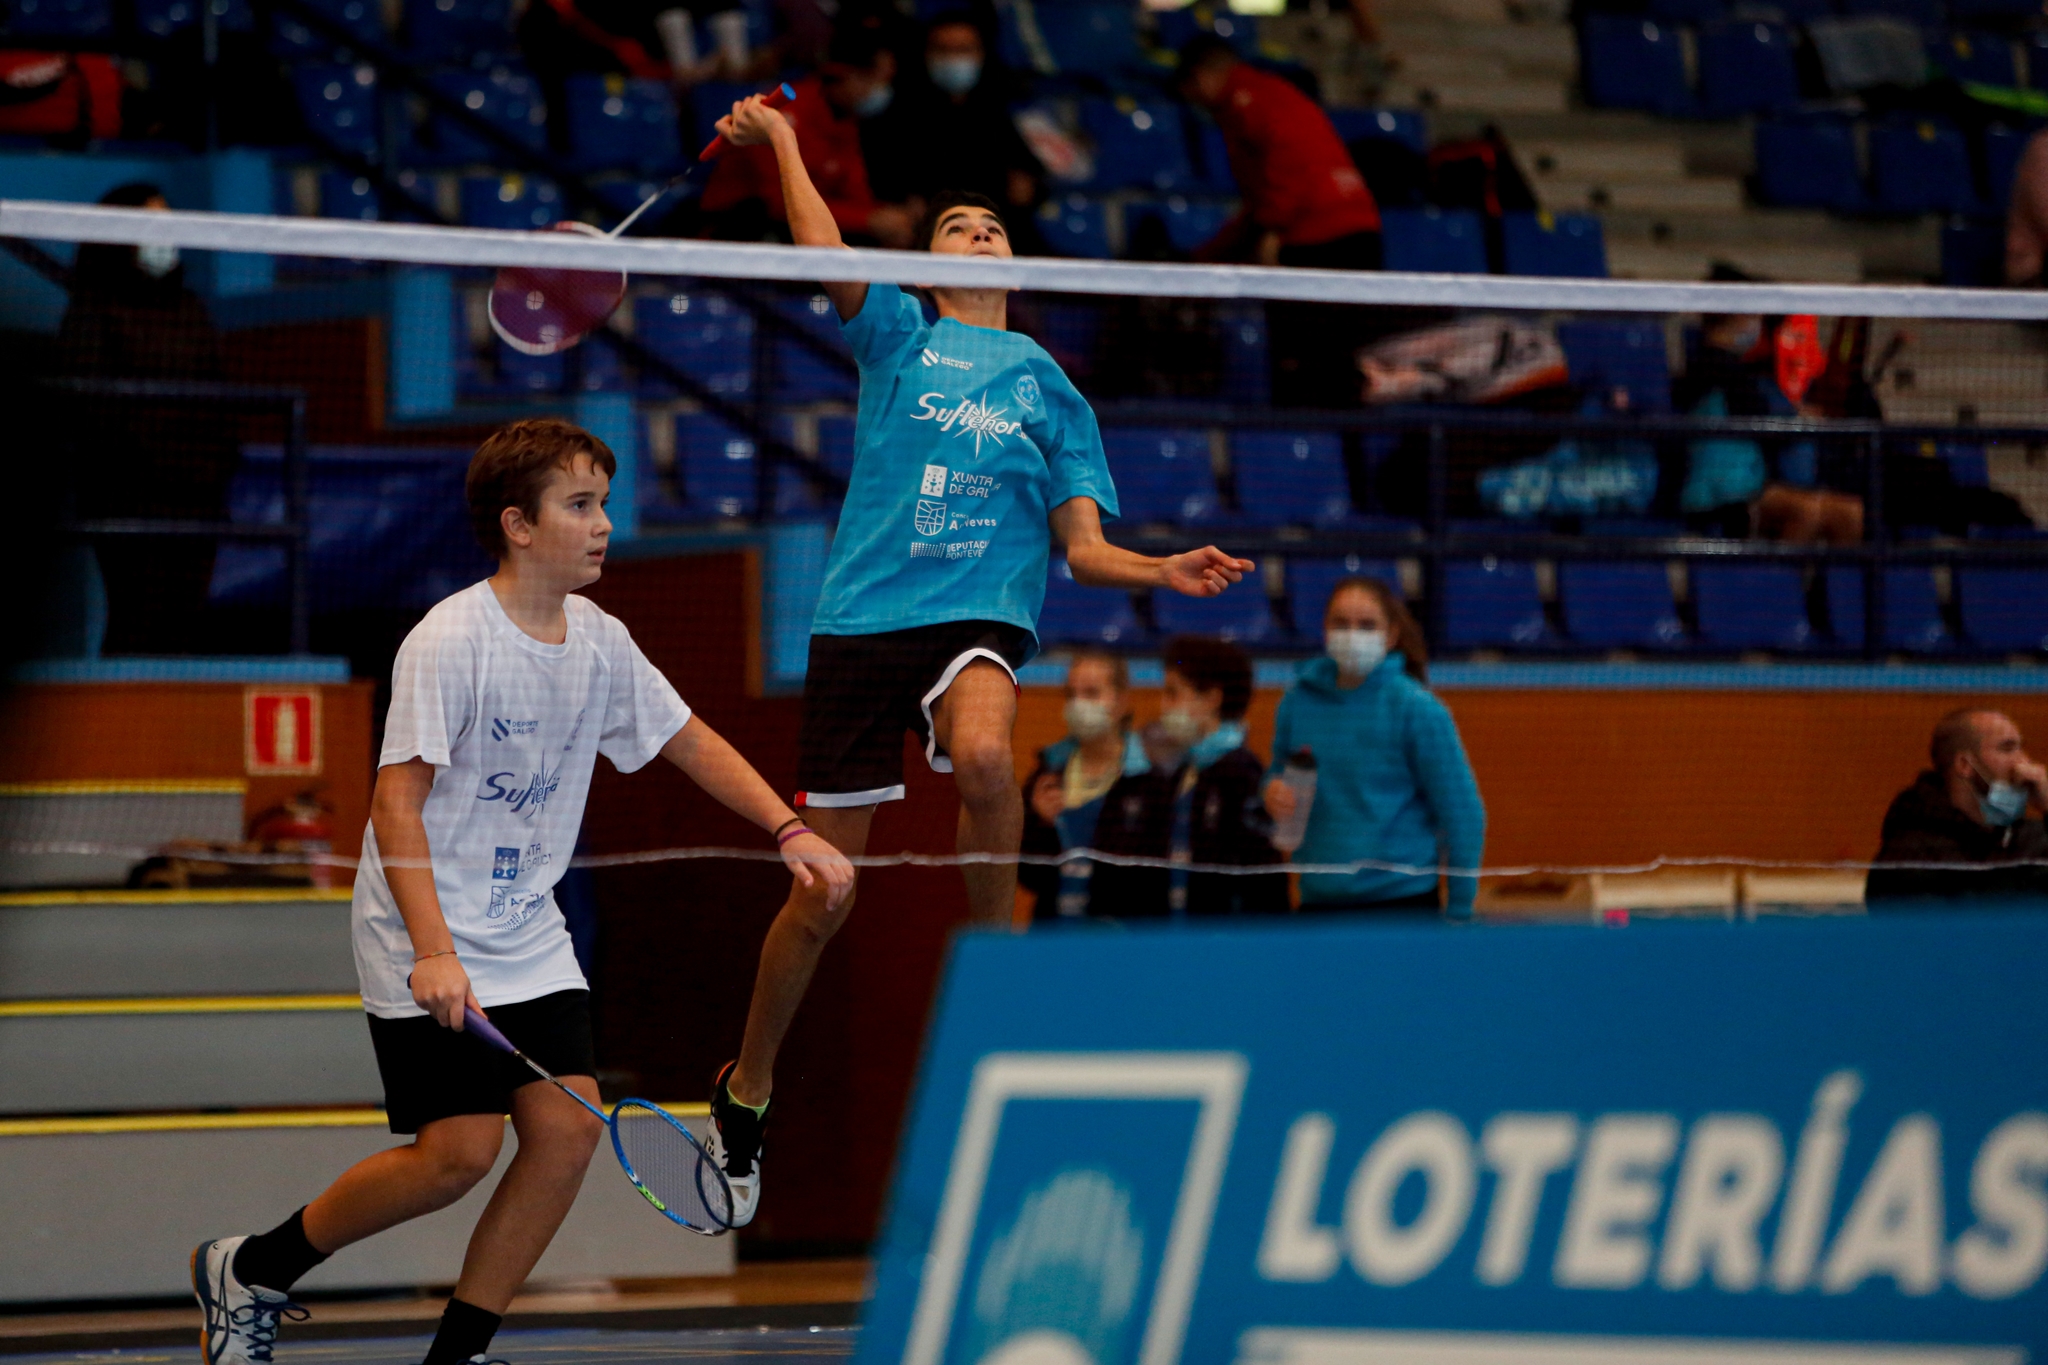 Ibiza'S Promising Youngsters Make Their Mark At The U-13 Nationals In Santa Eulària